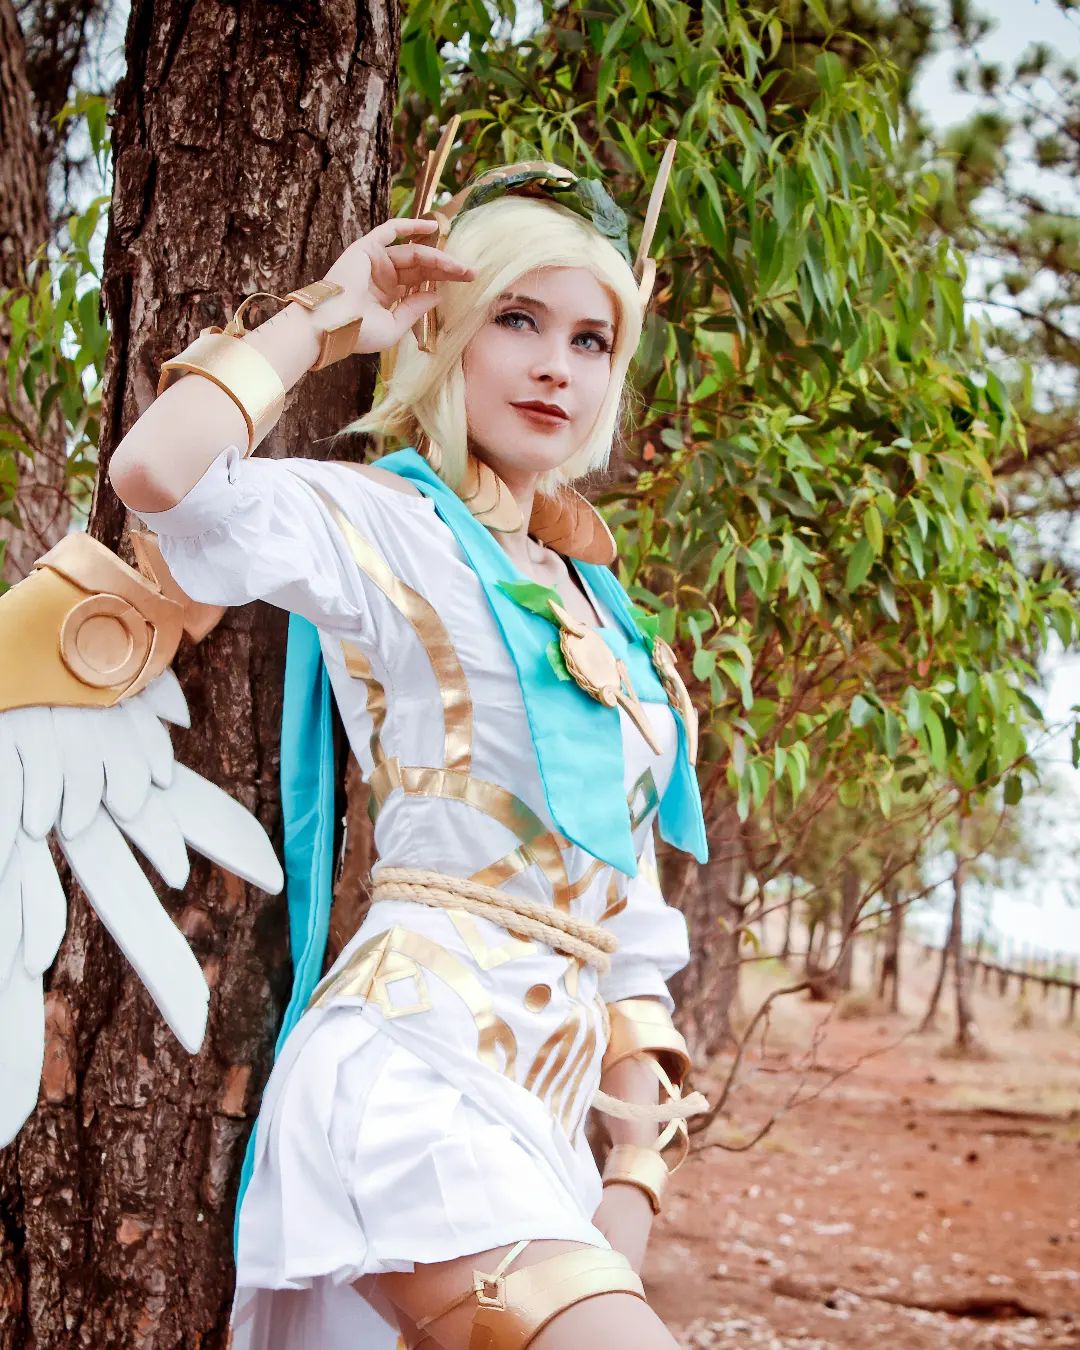 Mercy Victory Cosplay - Overwatch 2 - Rizzy 01